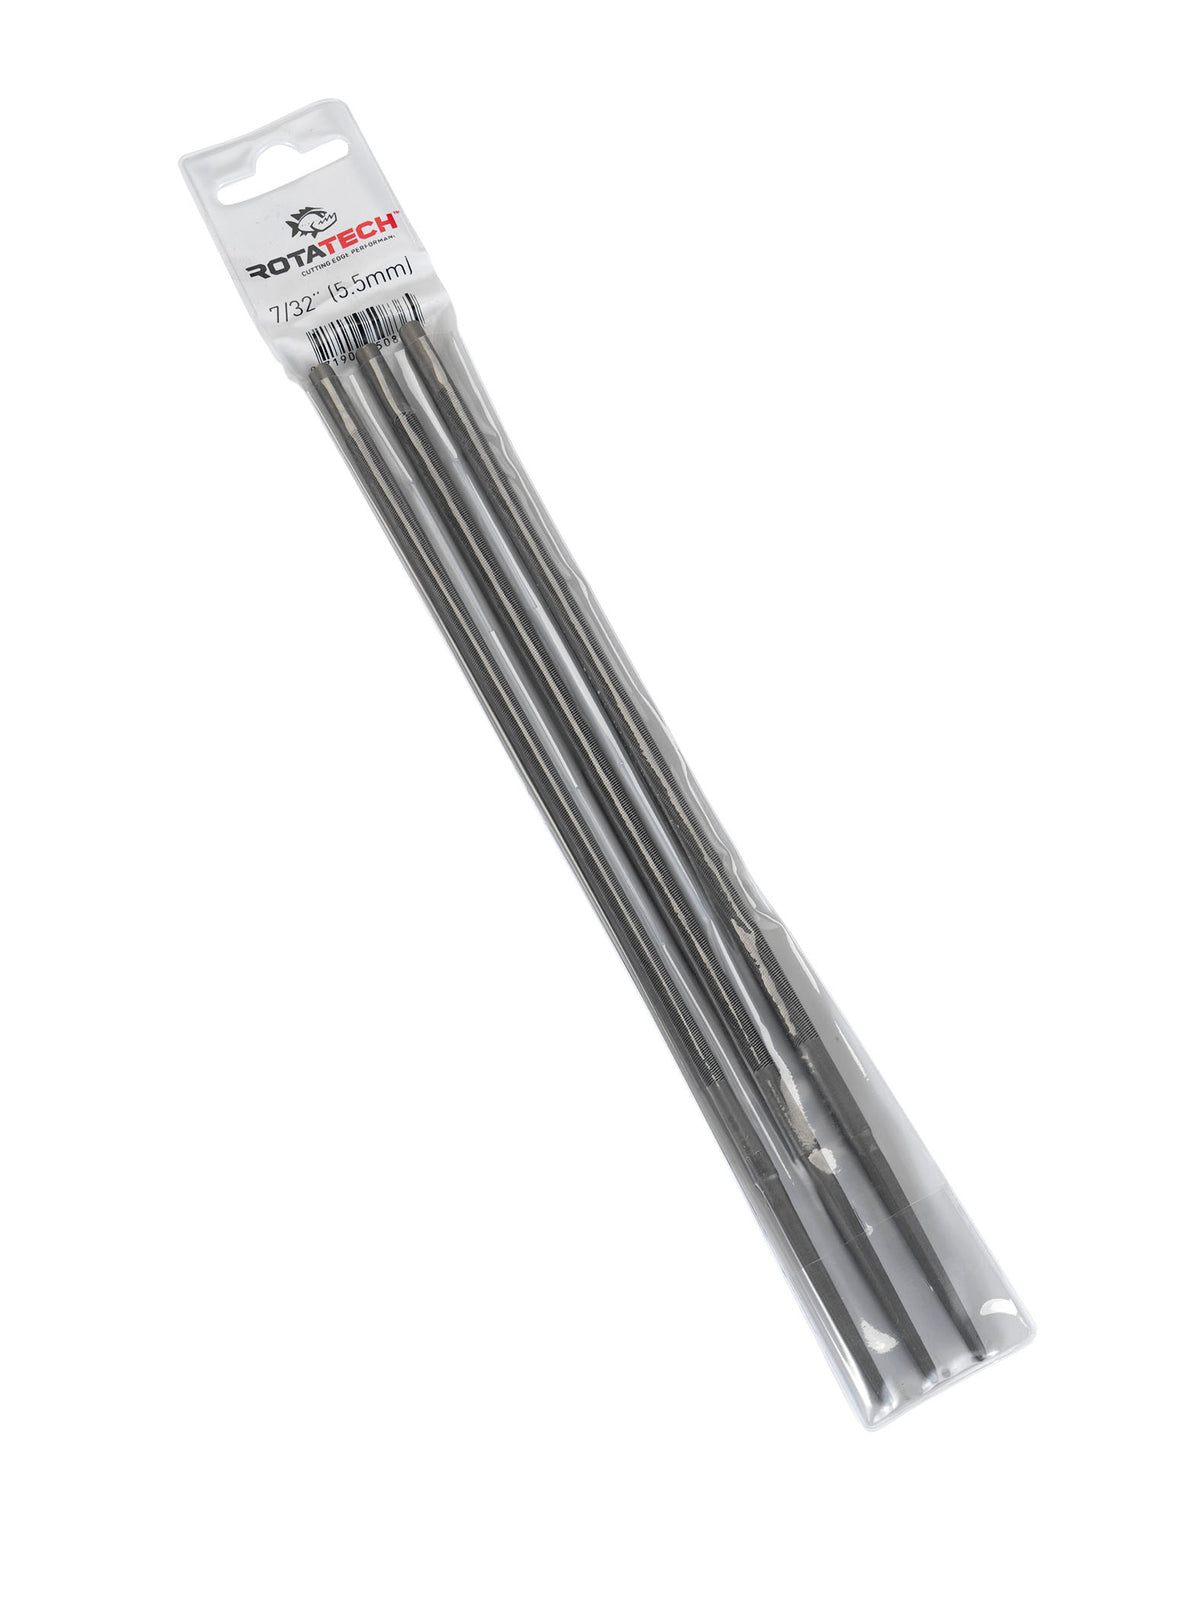 Rotatech 5/32" Round Chainsaw Files Pack Of 3